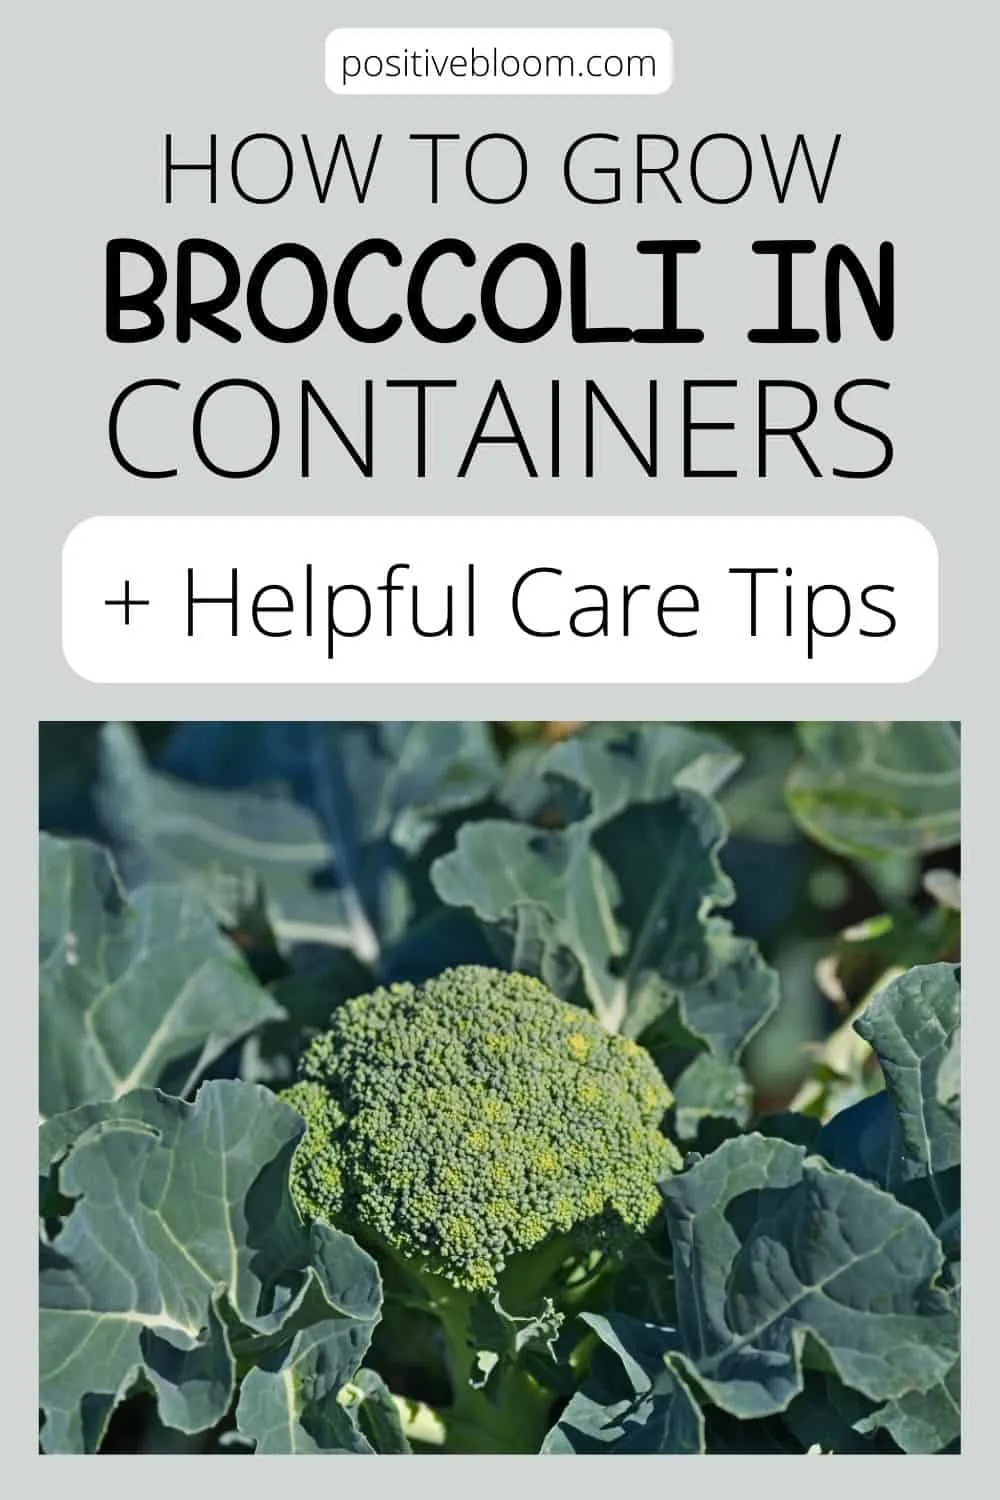 How To Grow Broccoli In Containers + Helpful Care Tips Pinterest